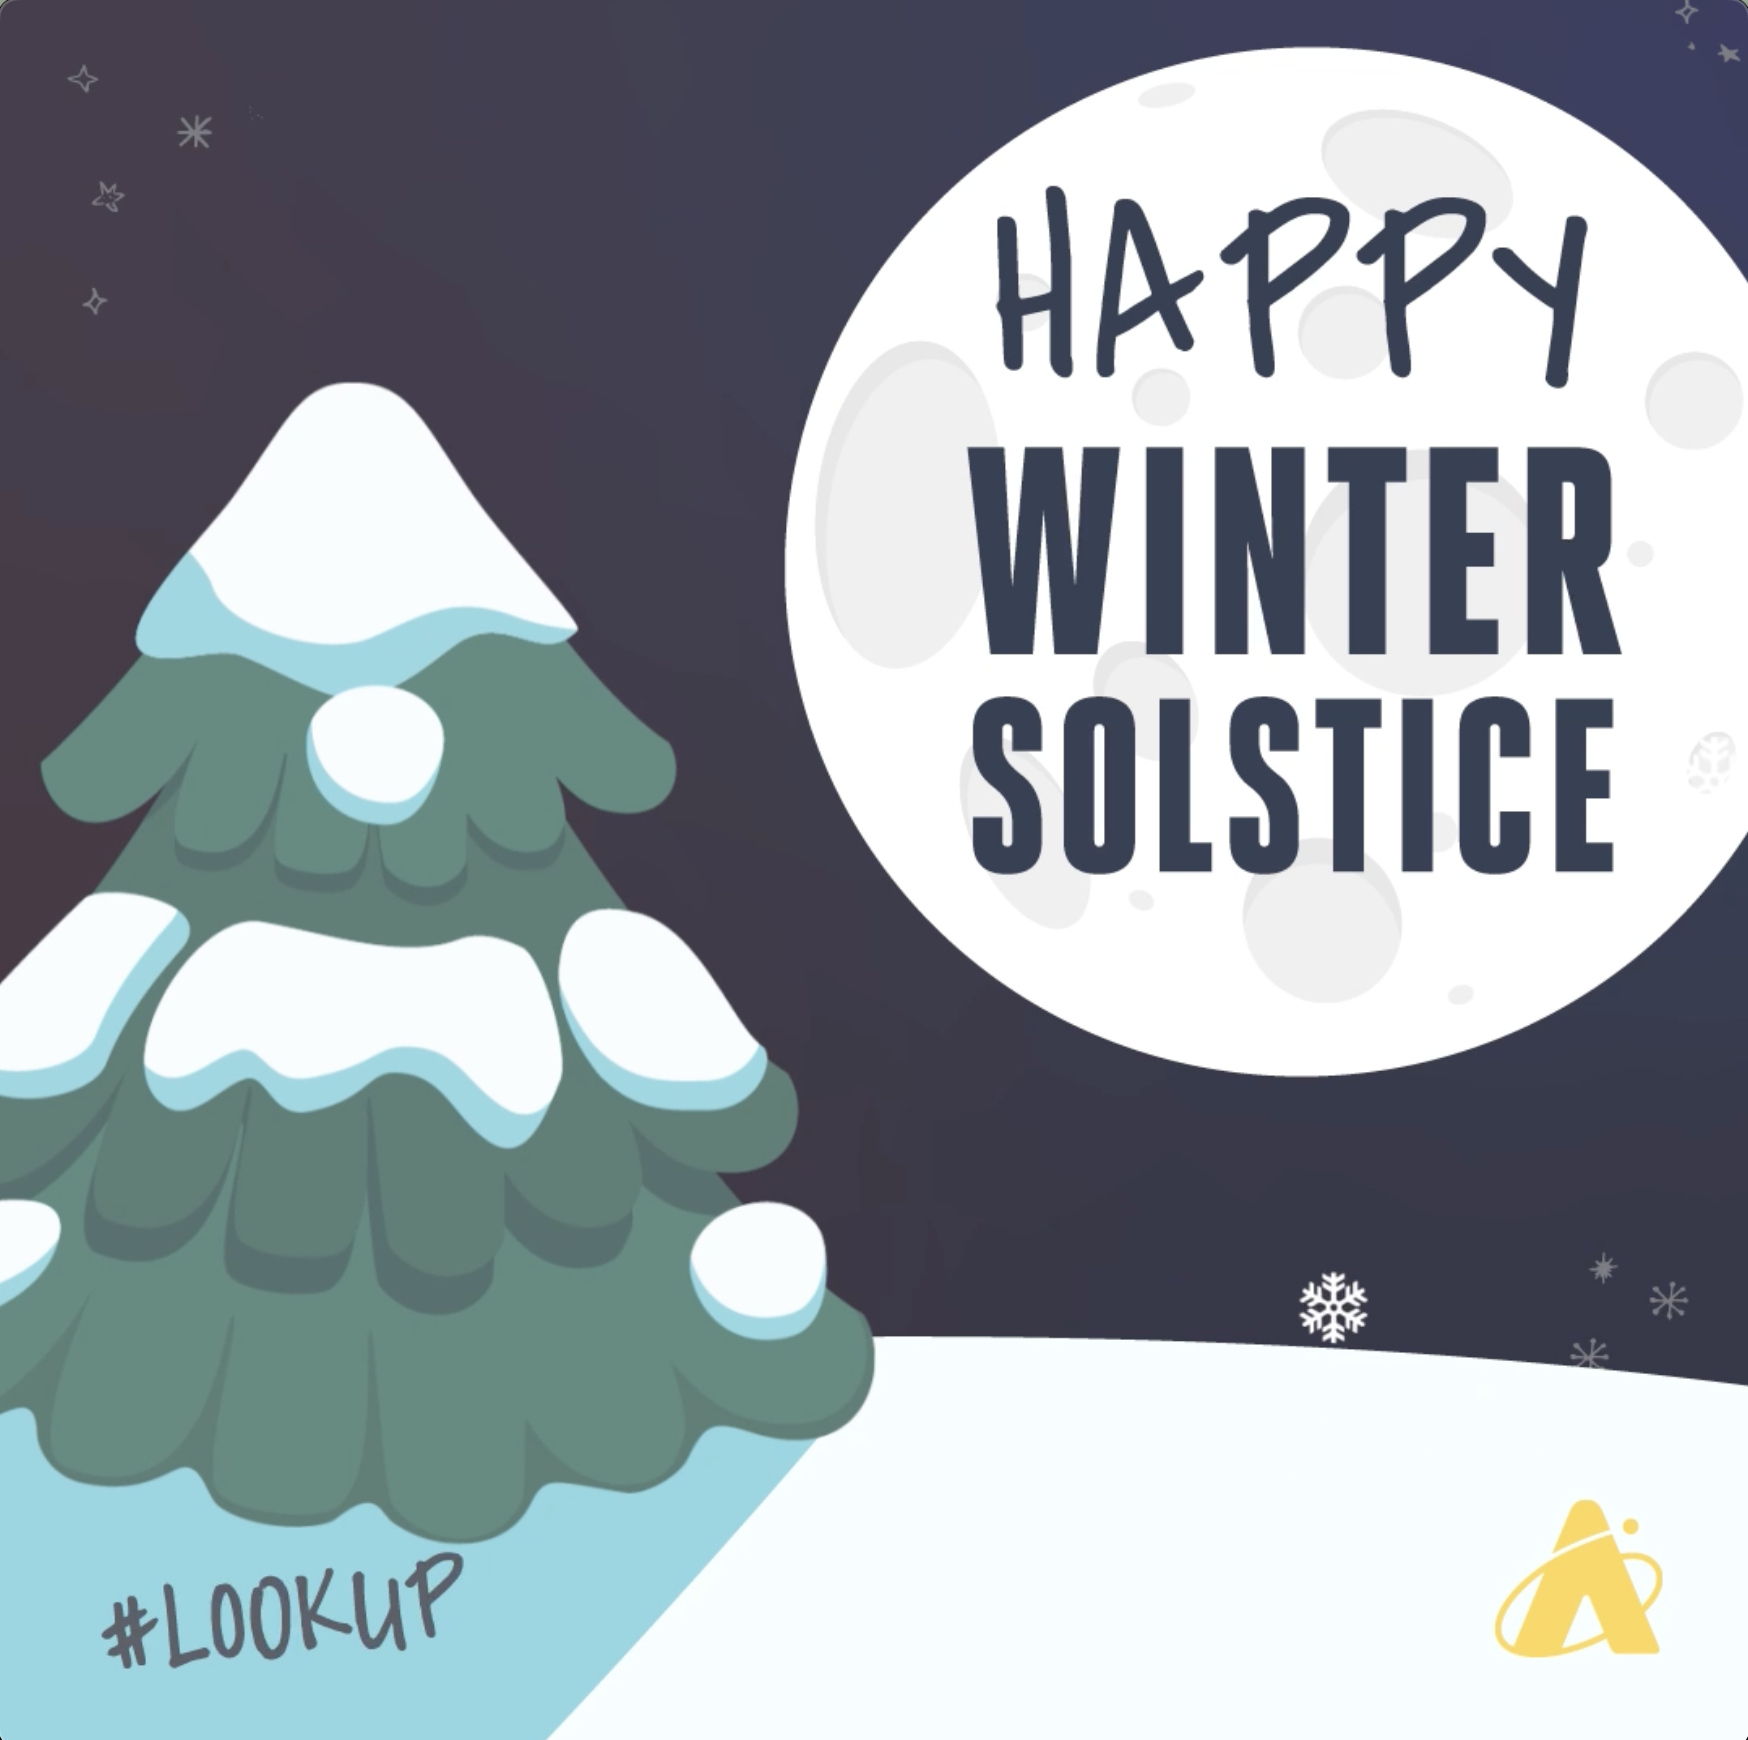 Adler Planetarium graphic illustrating a snow covered pine tree, a large Moon, and text that reads “HAPPY WINTER SOLSTICE”.